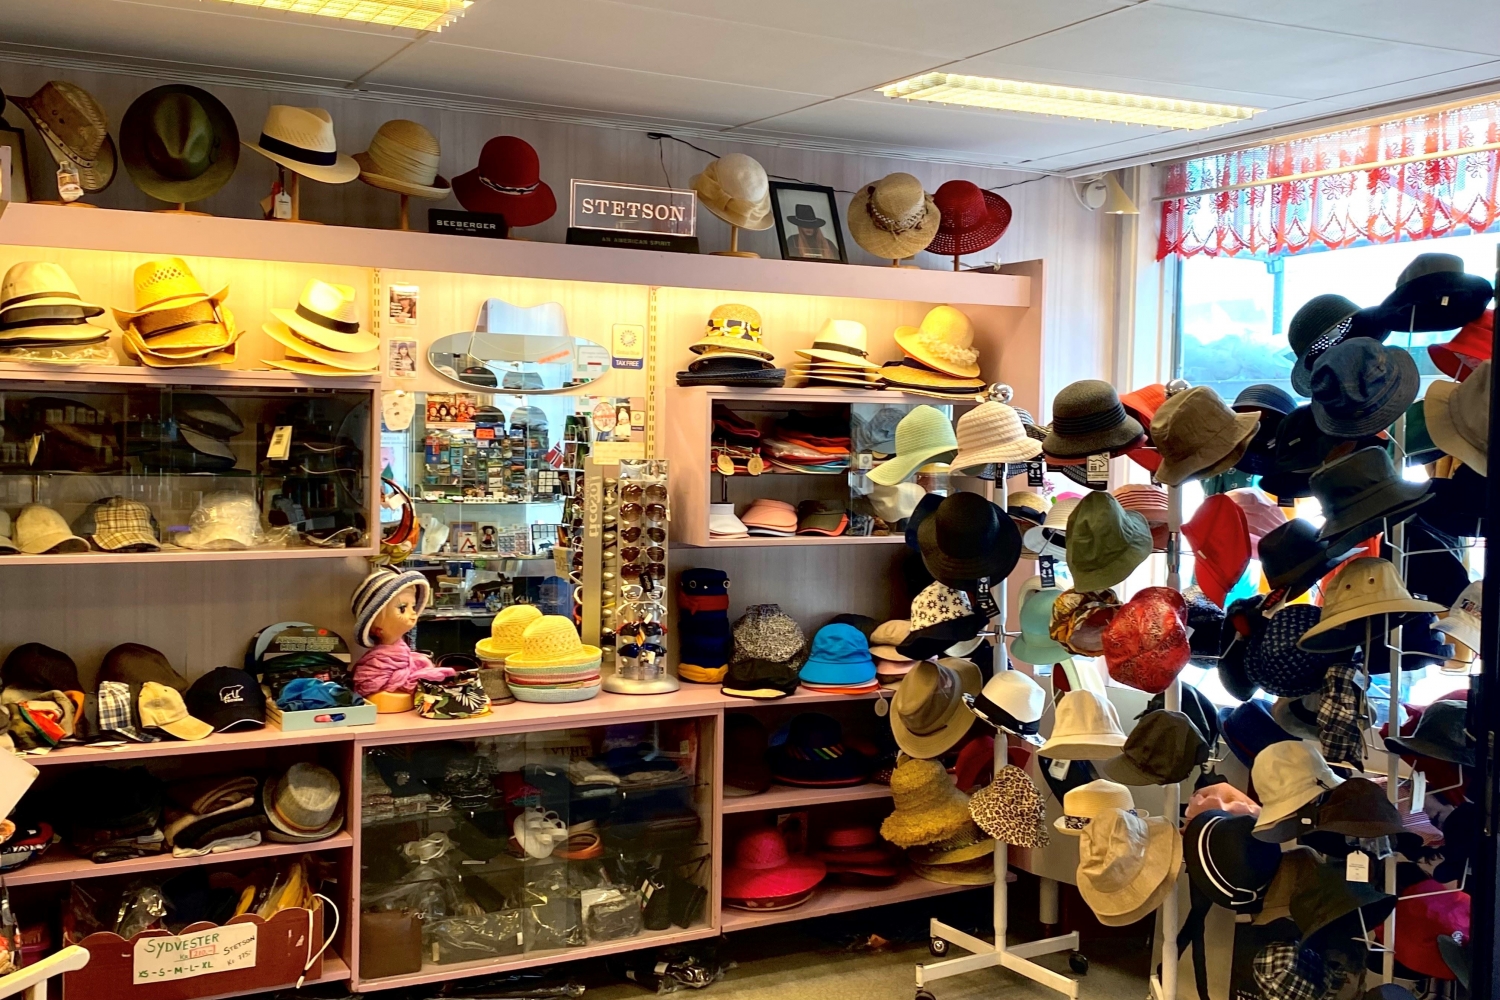 The hat collection in the store